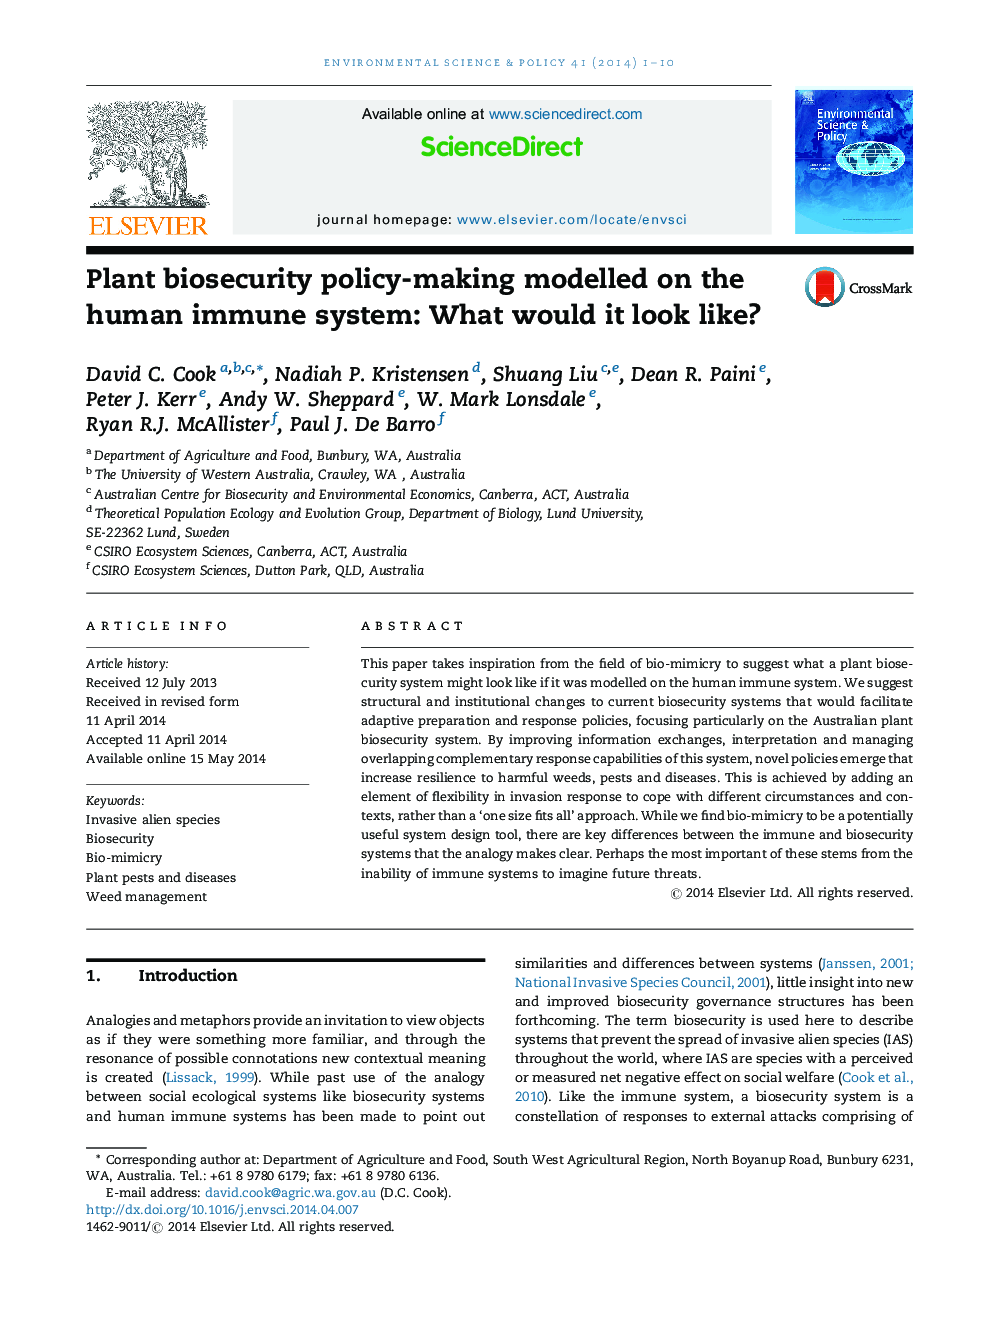 Plant biosecurity policy-making modelled on the human immune system: What would it look like?